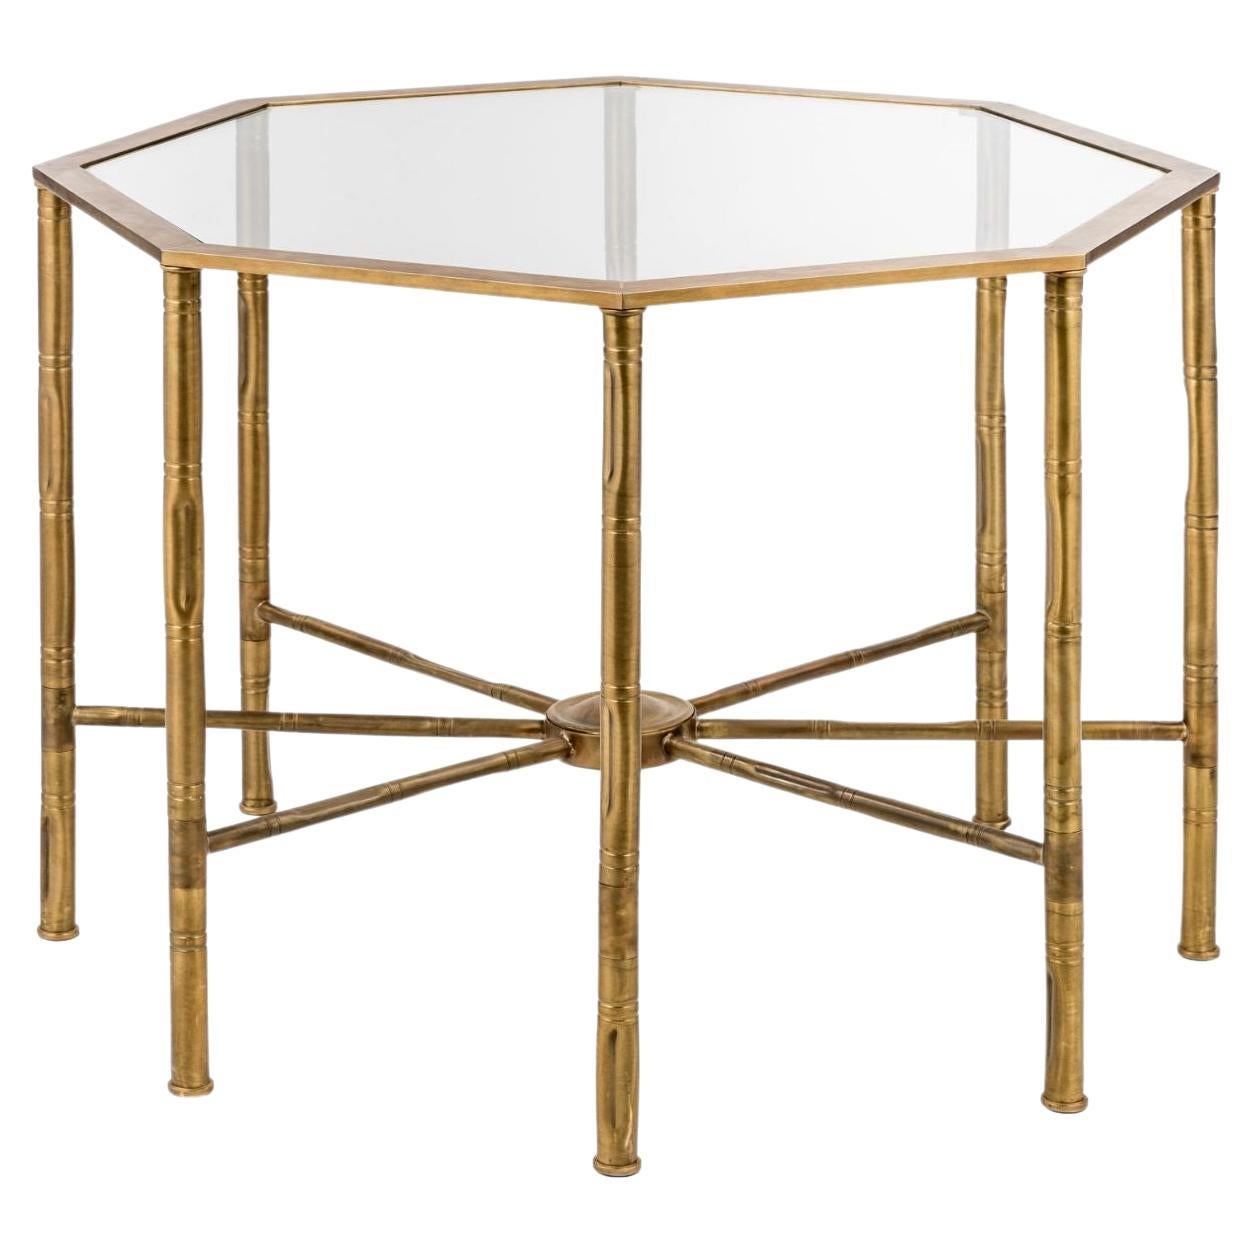 Bamboo Octagonal Side Table with Glass Top, Natural Finish